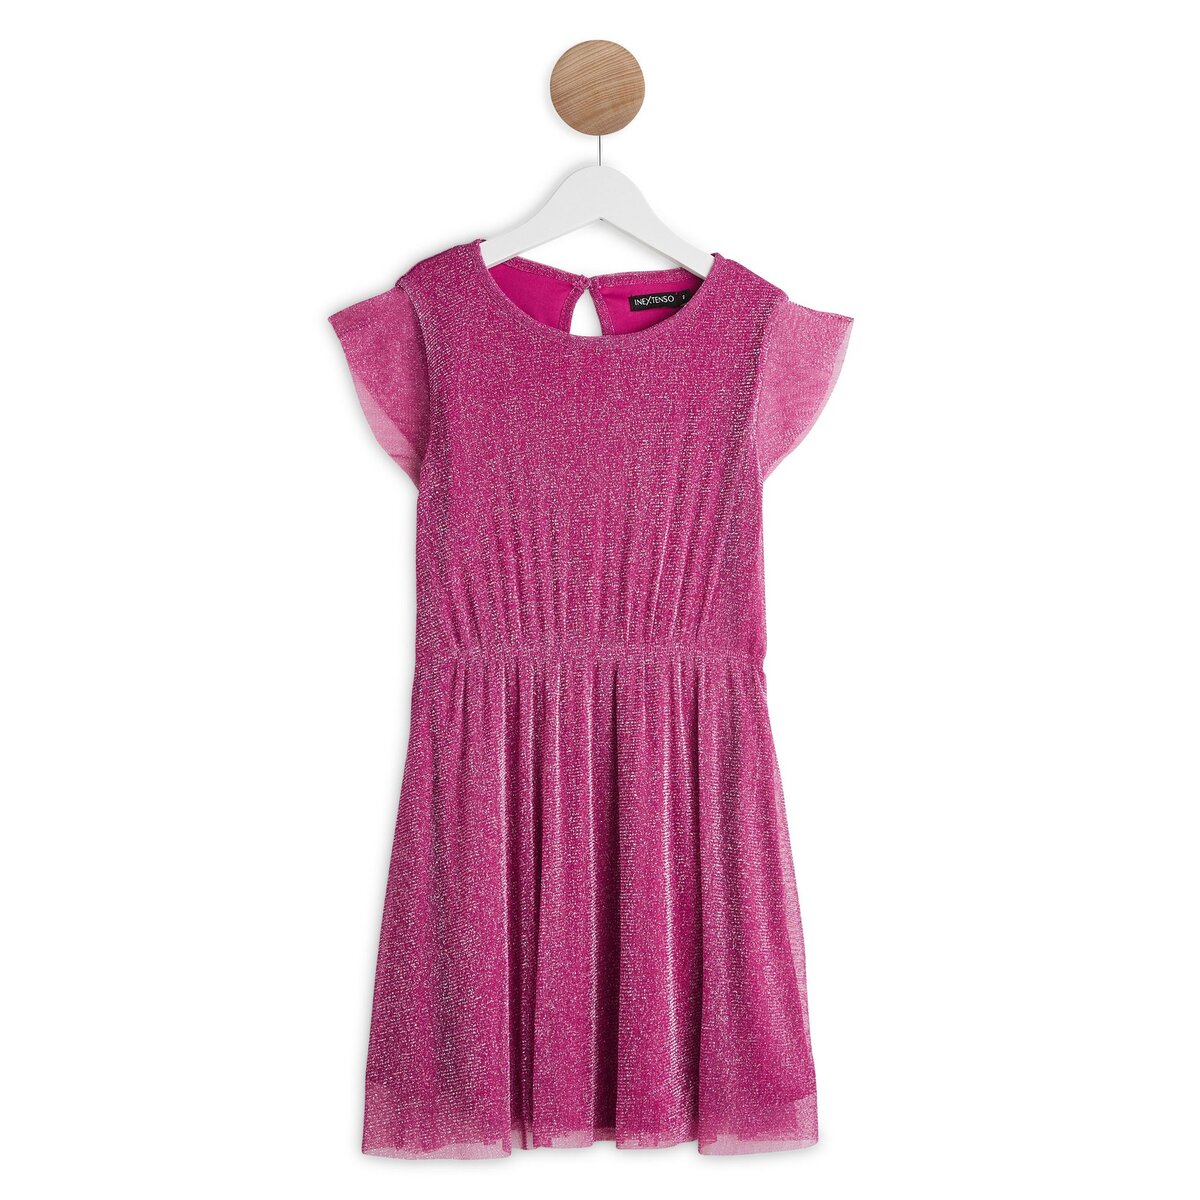 INEXTENSO Robe tulle fille